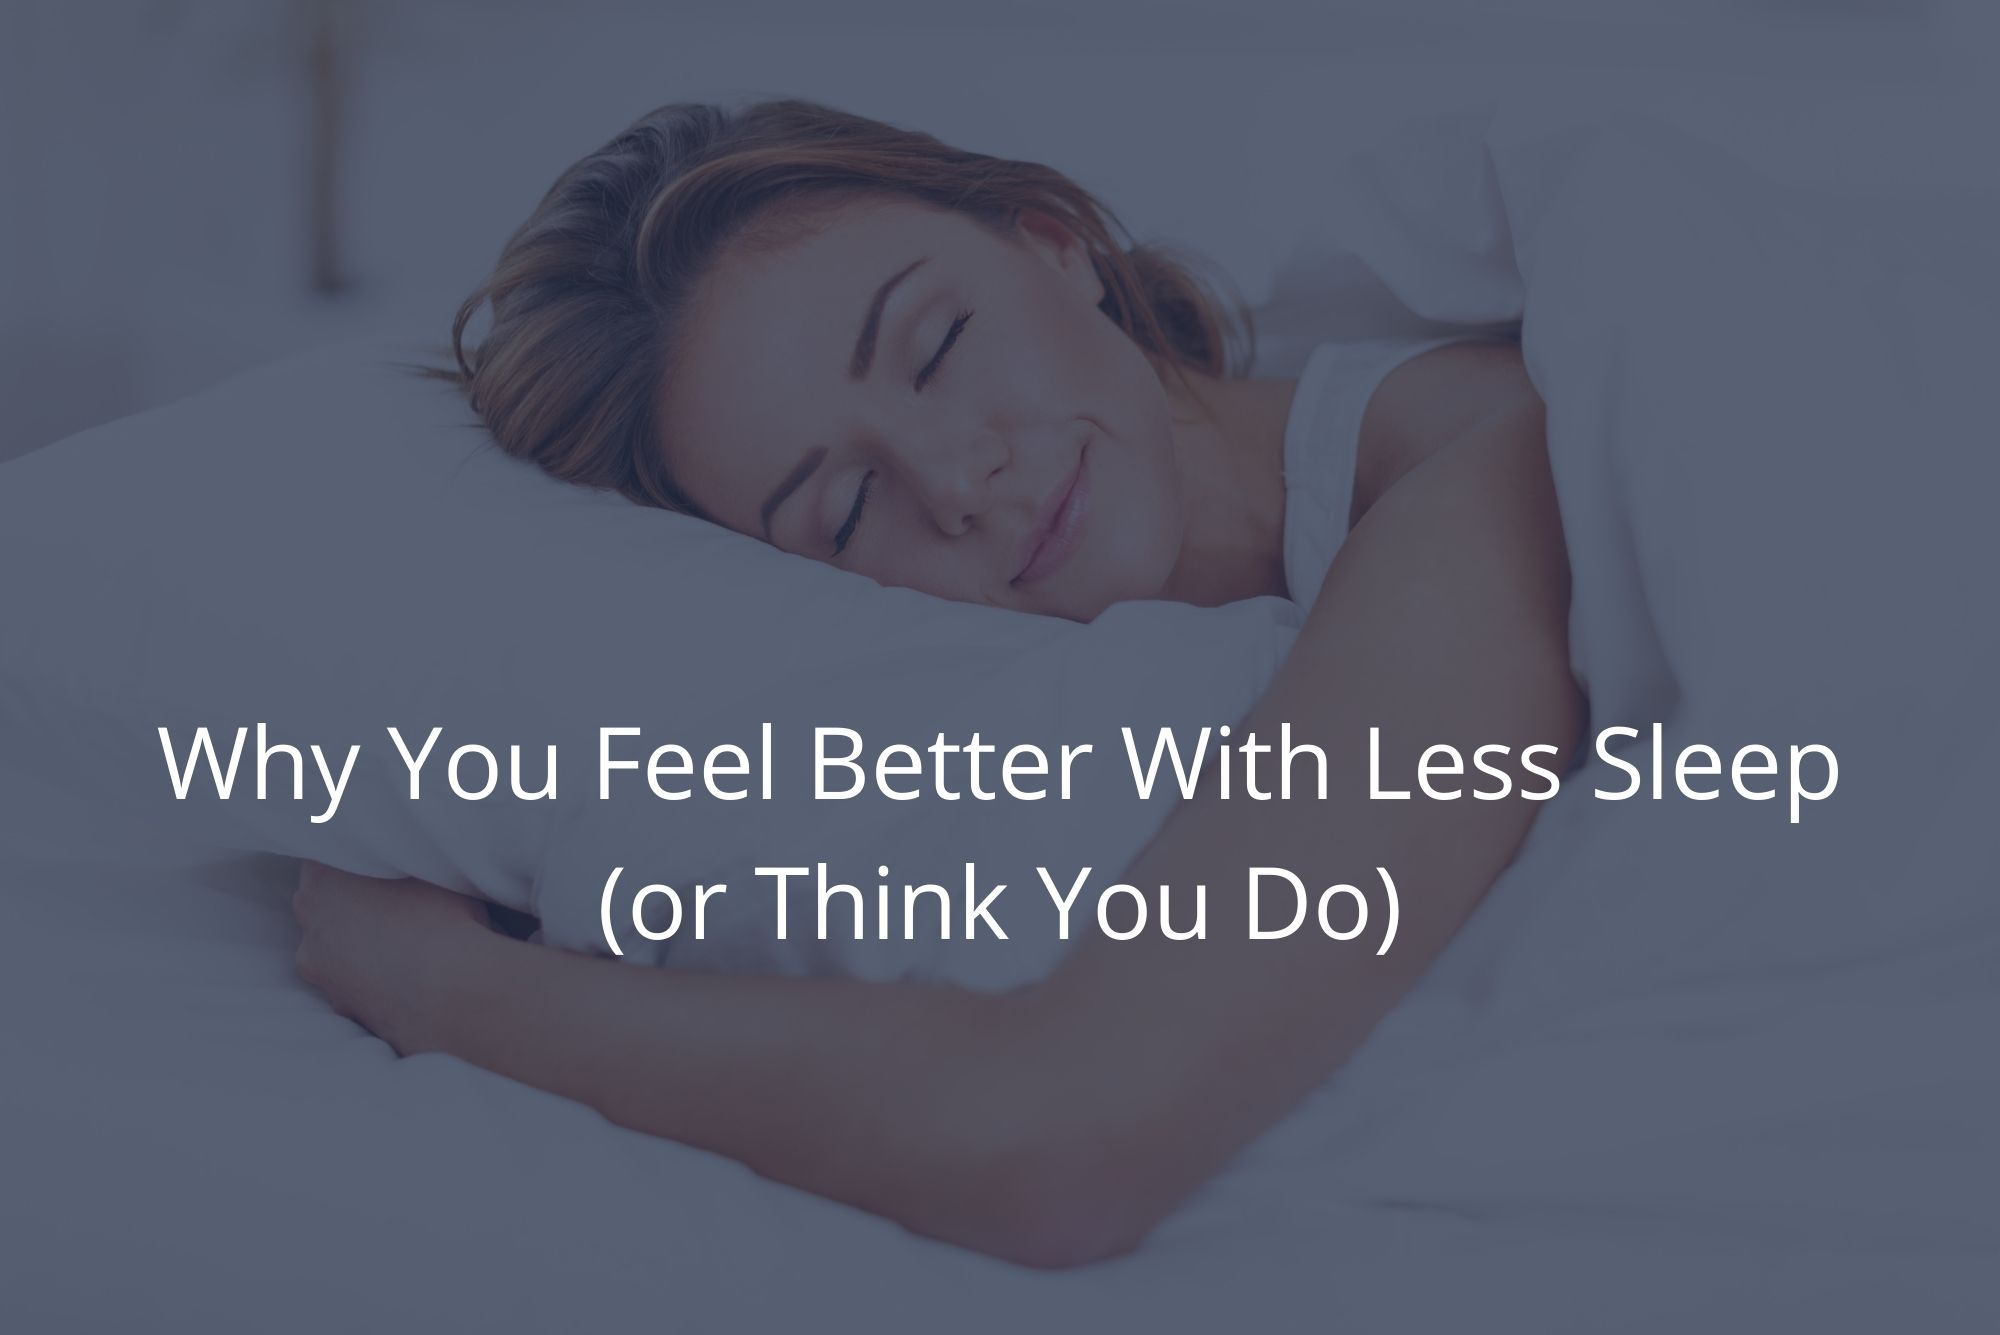 A woman smiles as she lies in a white bed with her eyes closed, realizing you don’t really feel better with less sleep.